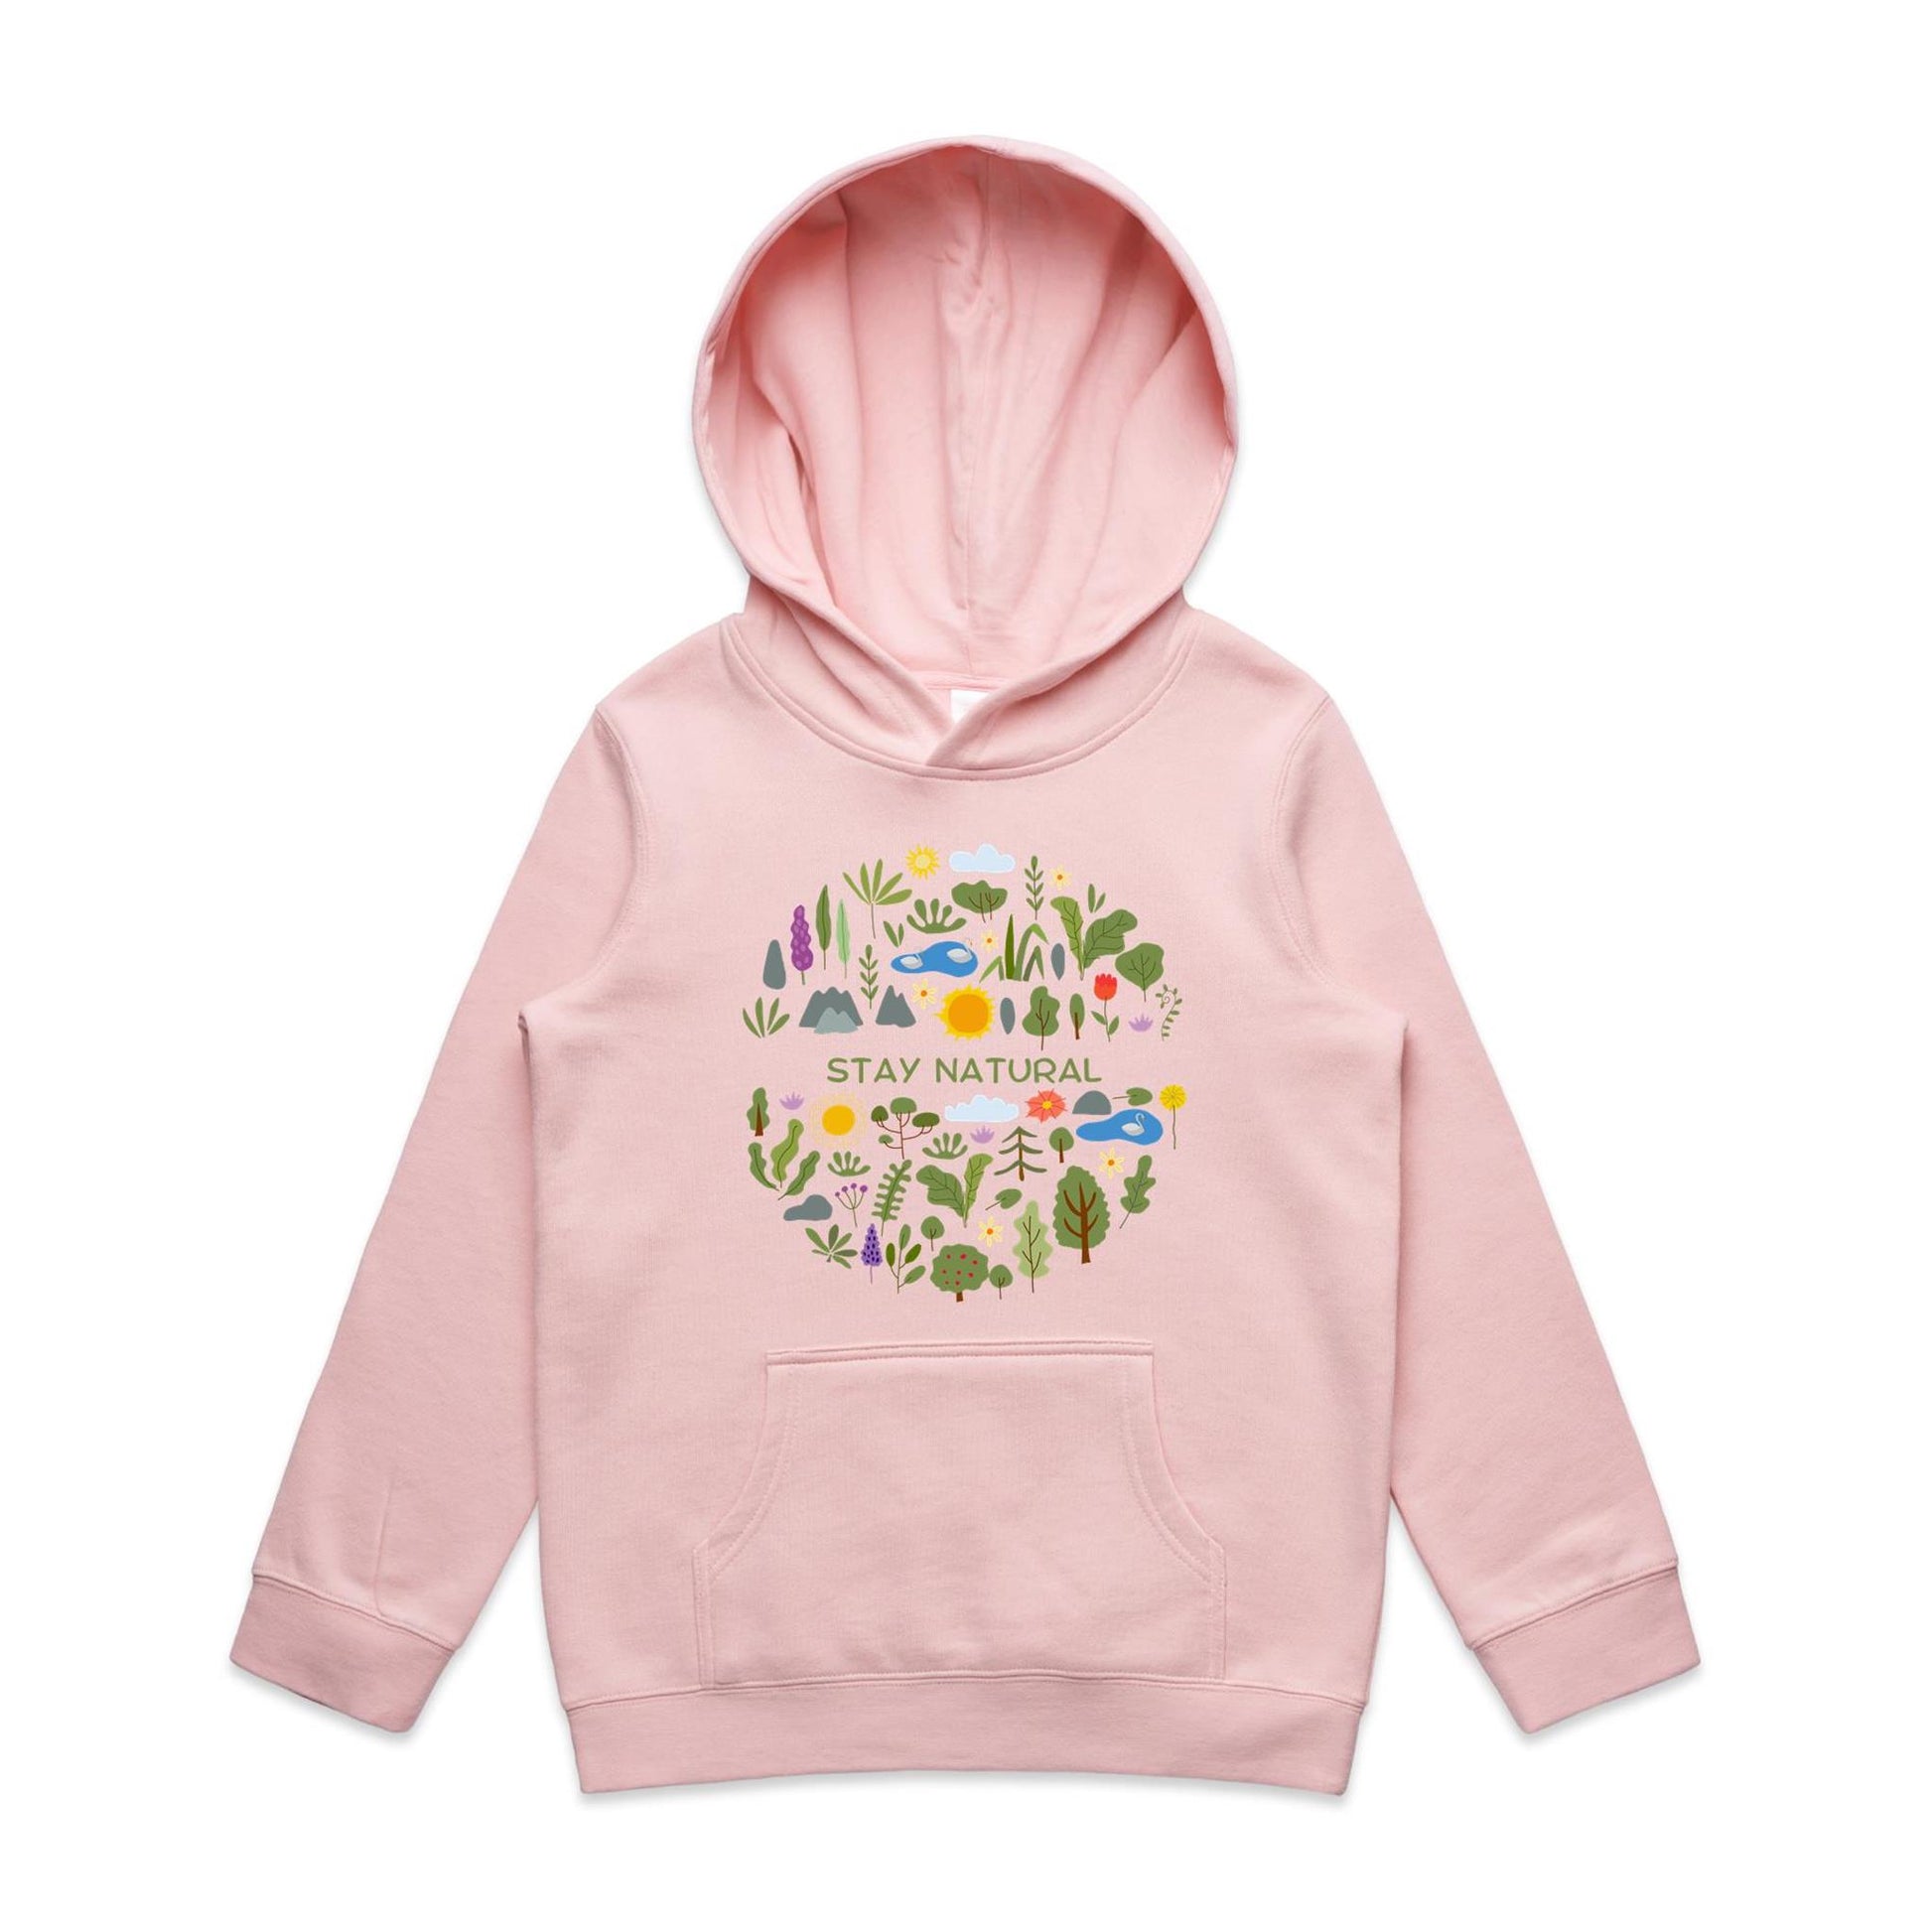 Stay Natural - Youth Supply Hood Pink Kids Hoodie Plants